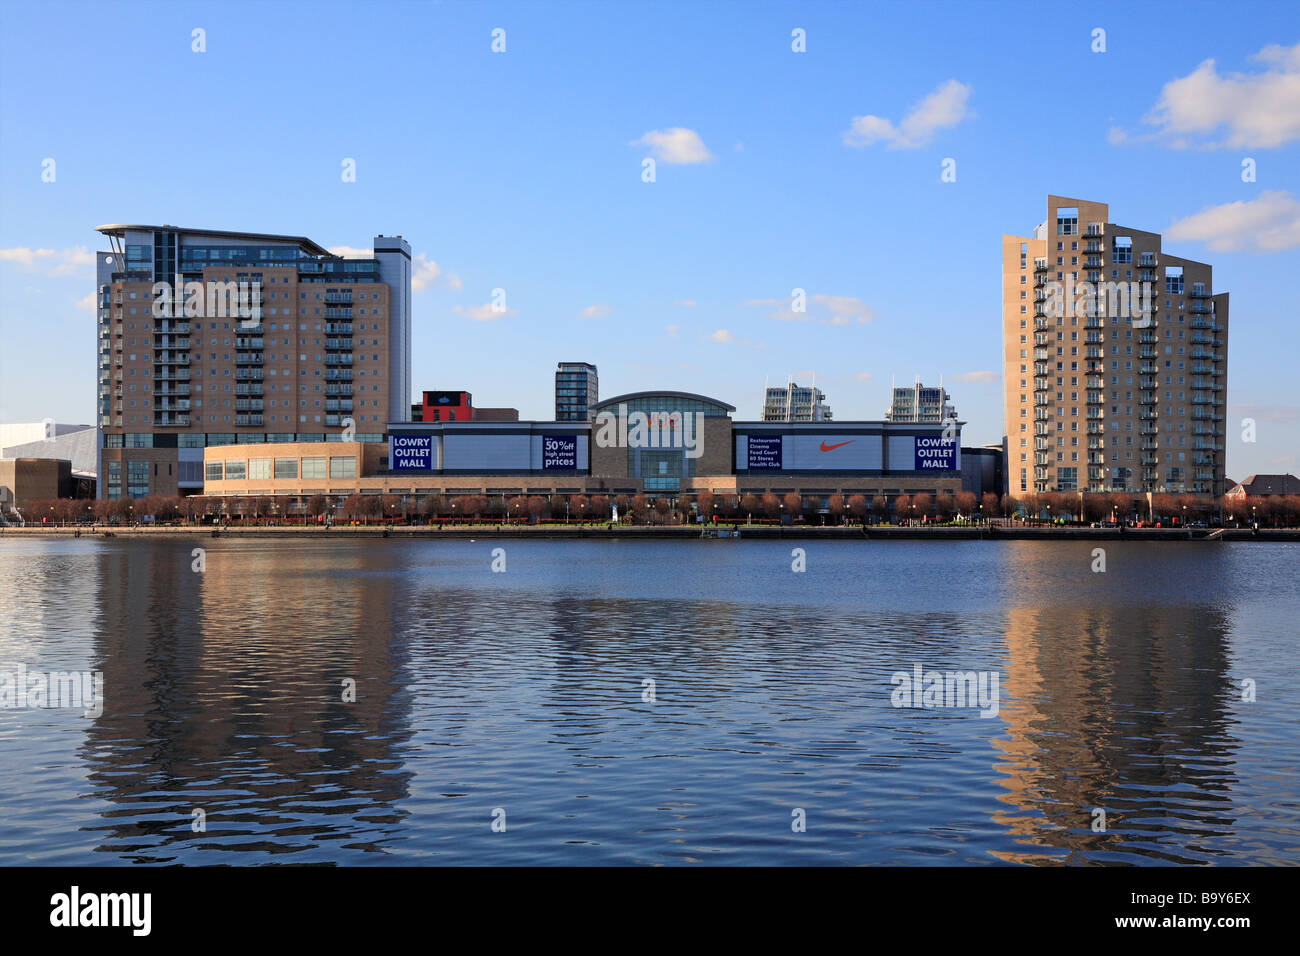 Vue Cinema and Lowry Outlet Mall, Salford Quays, Manchester, Lancashire, England, UK. Stock Photo